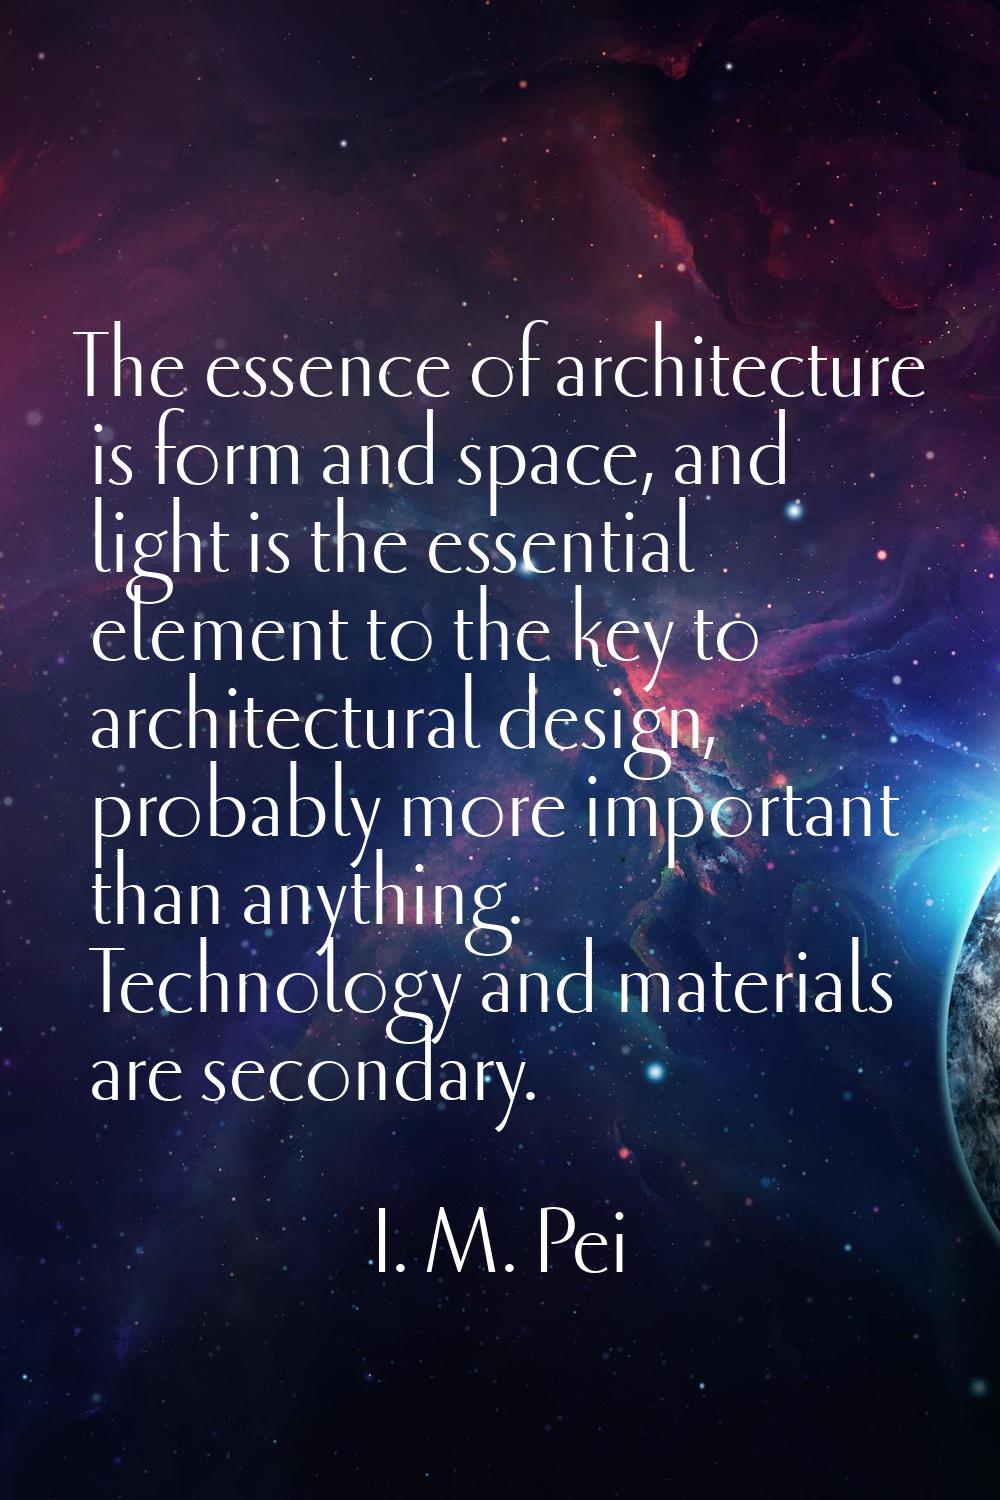 The essence of architecture is form and space, and light is the essential element to the key to arc